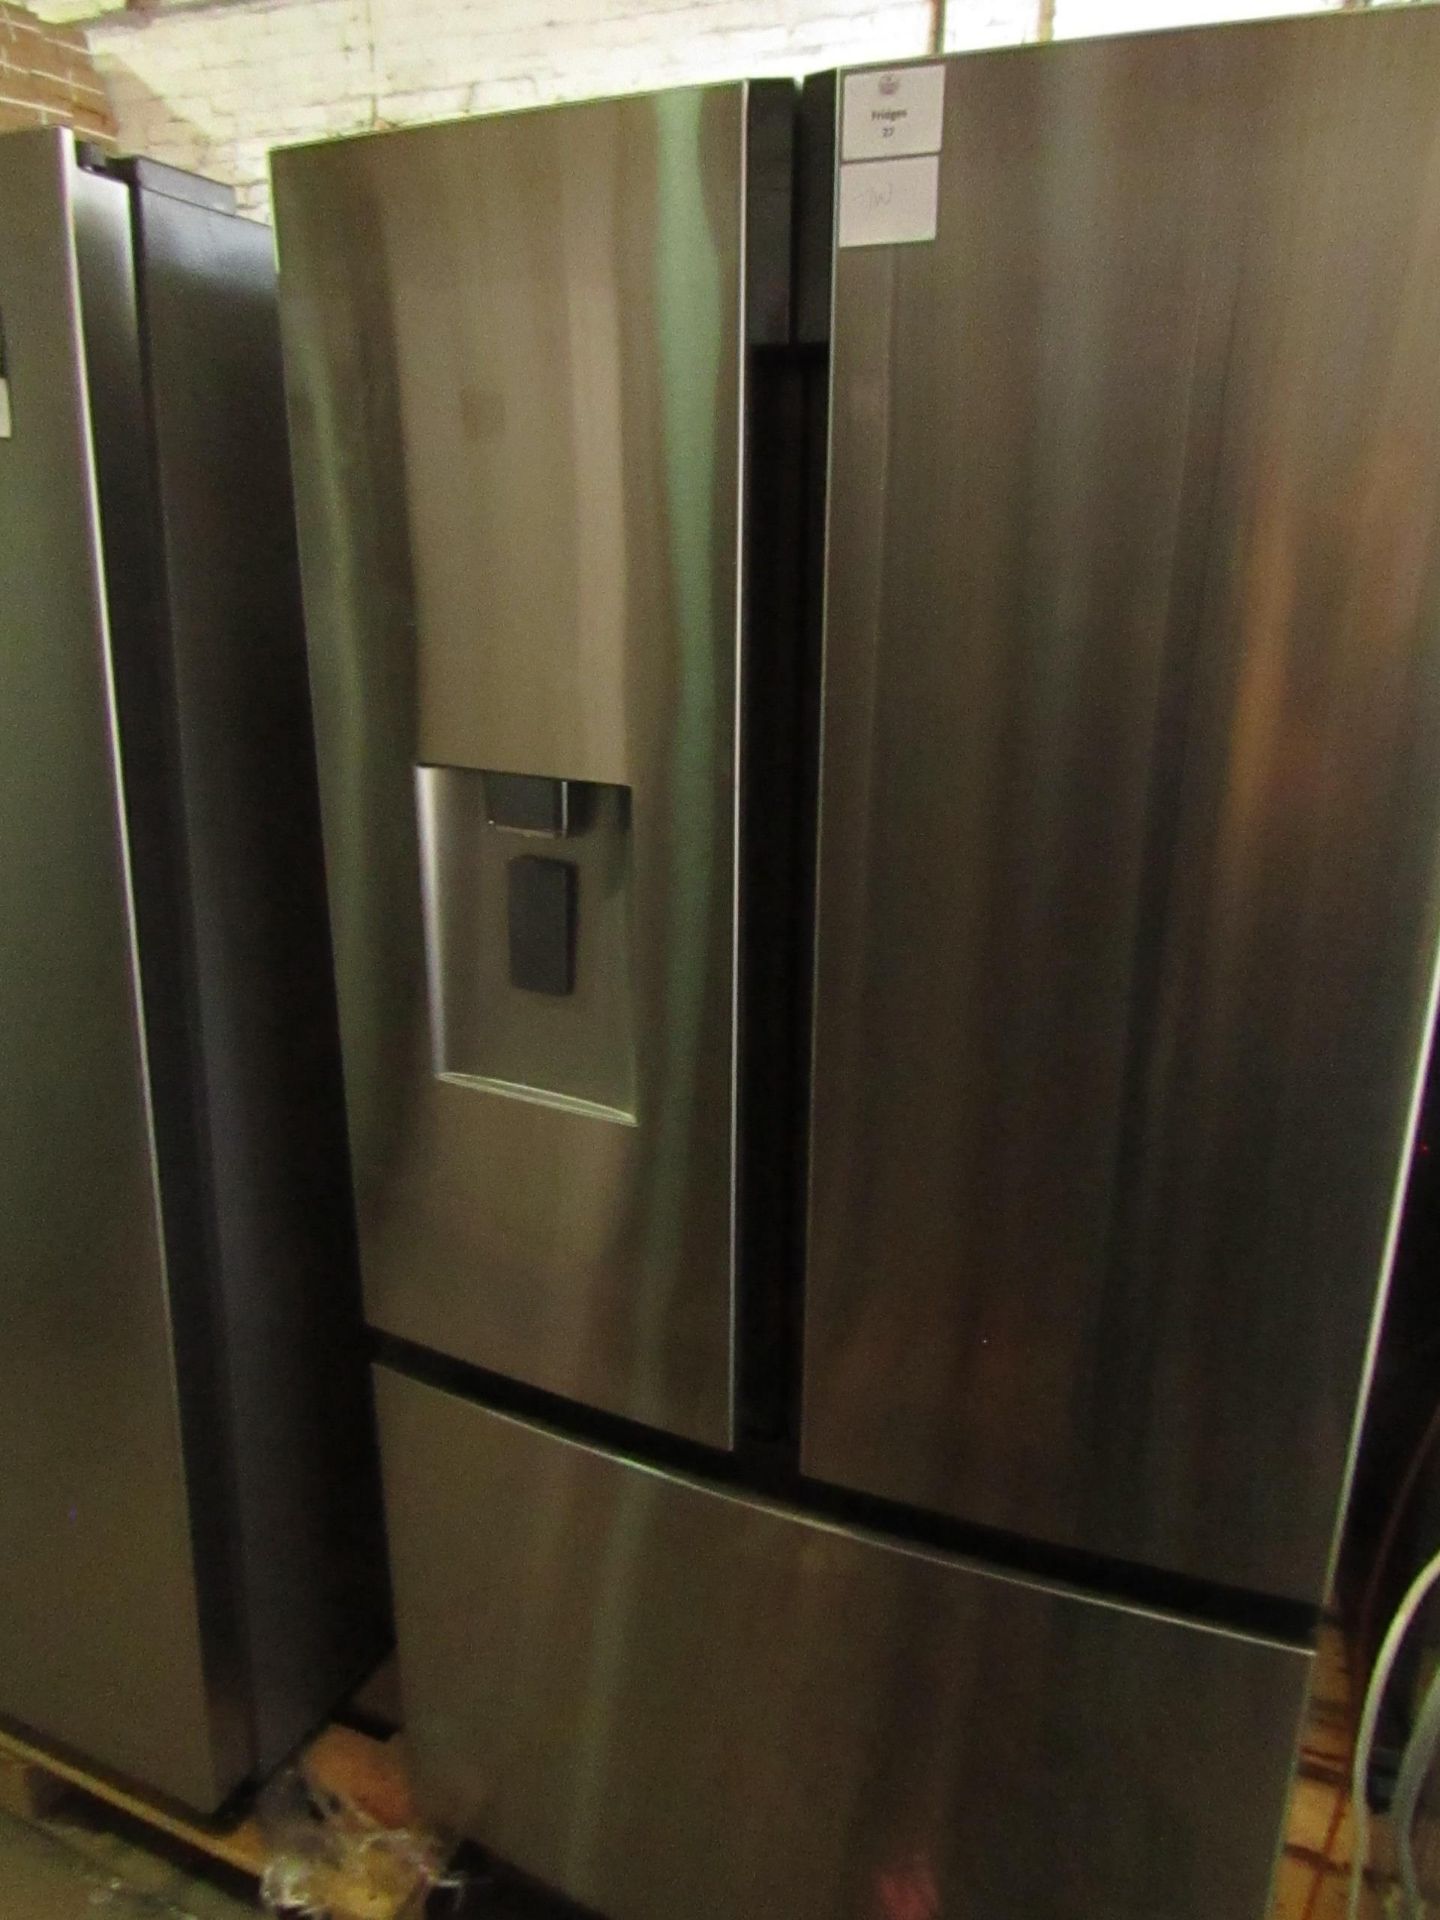 Hisense RF750N 3 door american fridge freezer with ice nad water dispenser, tested and working for